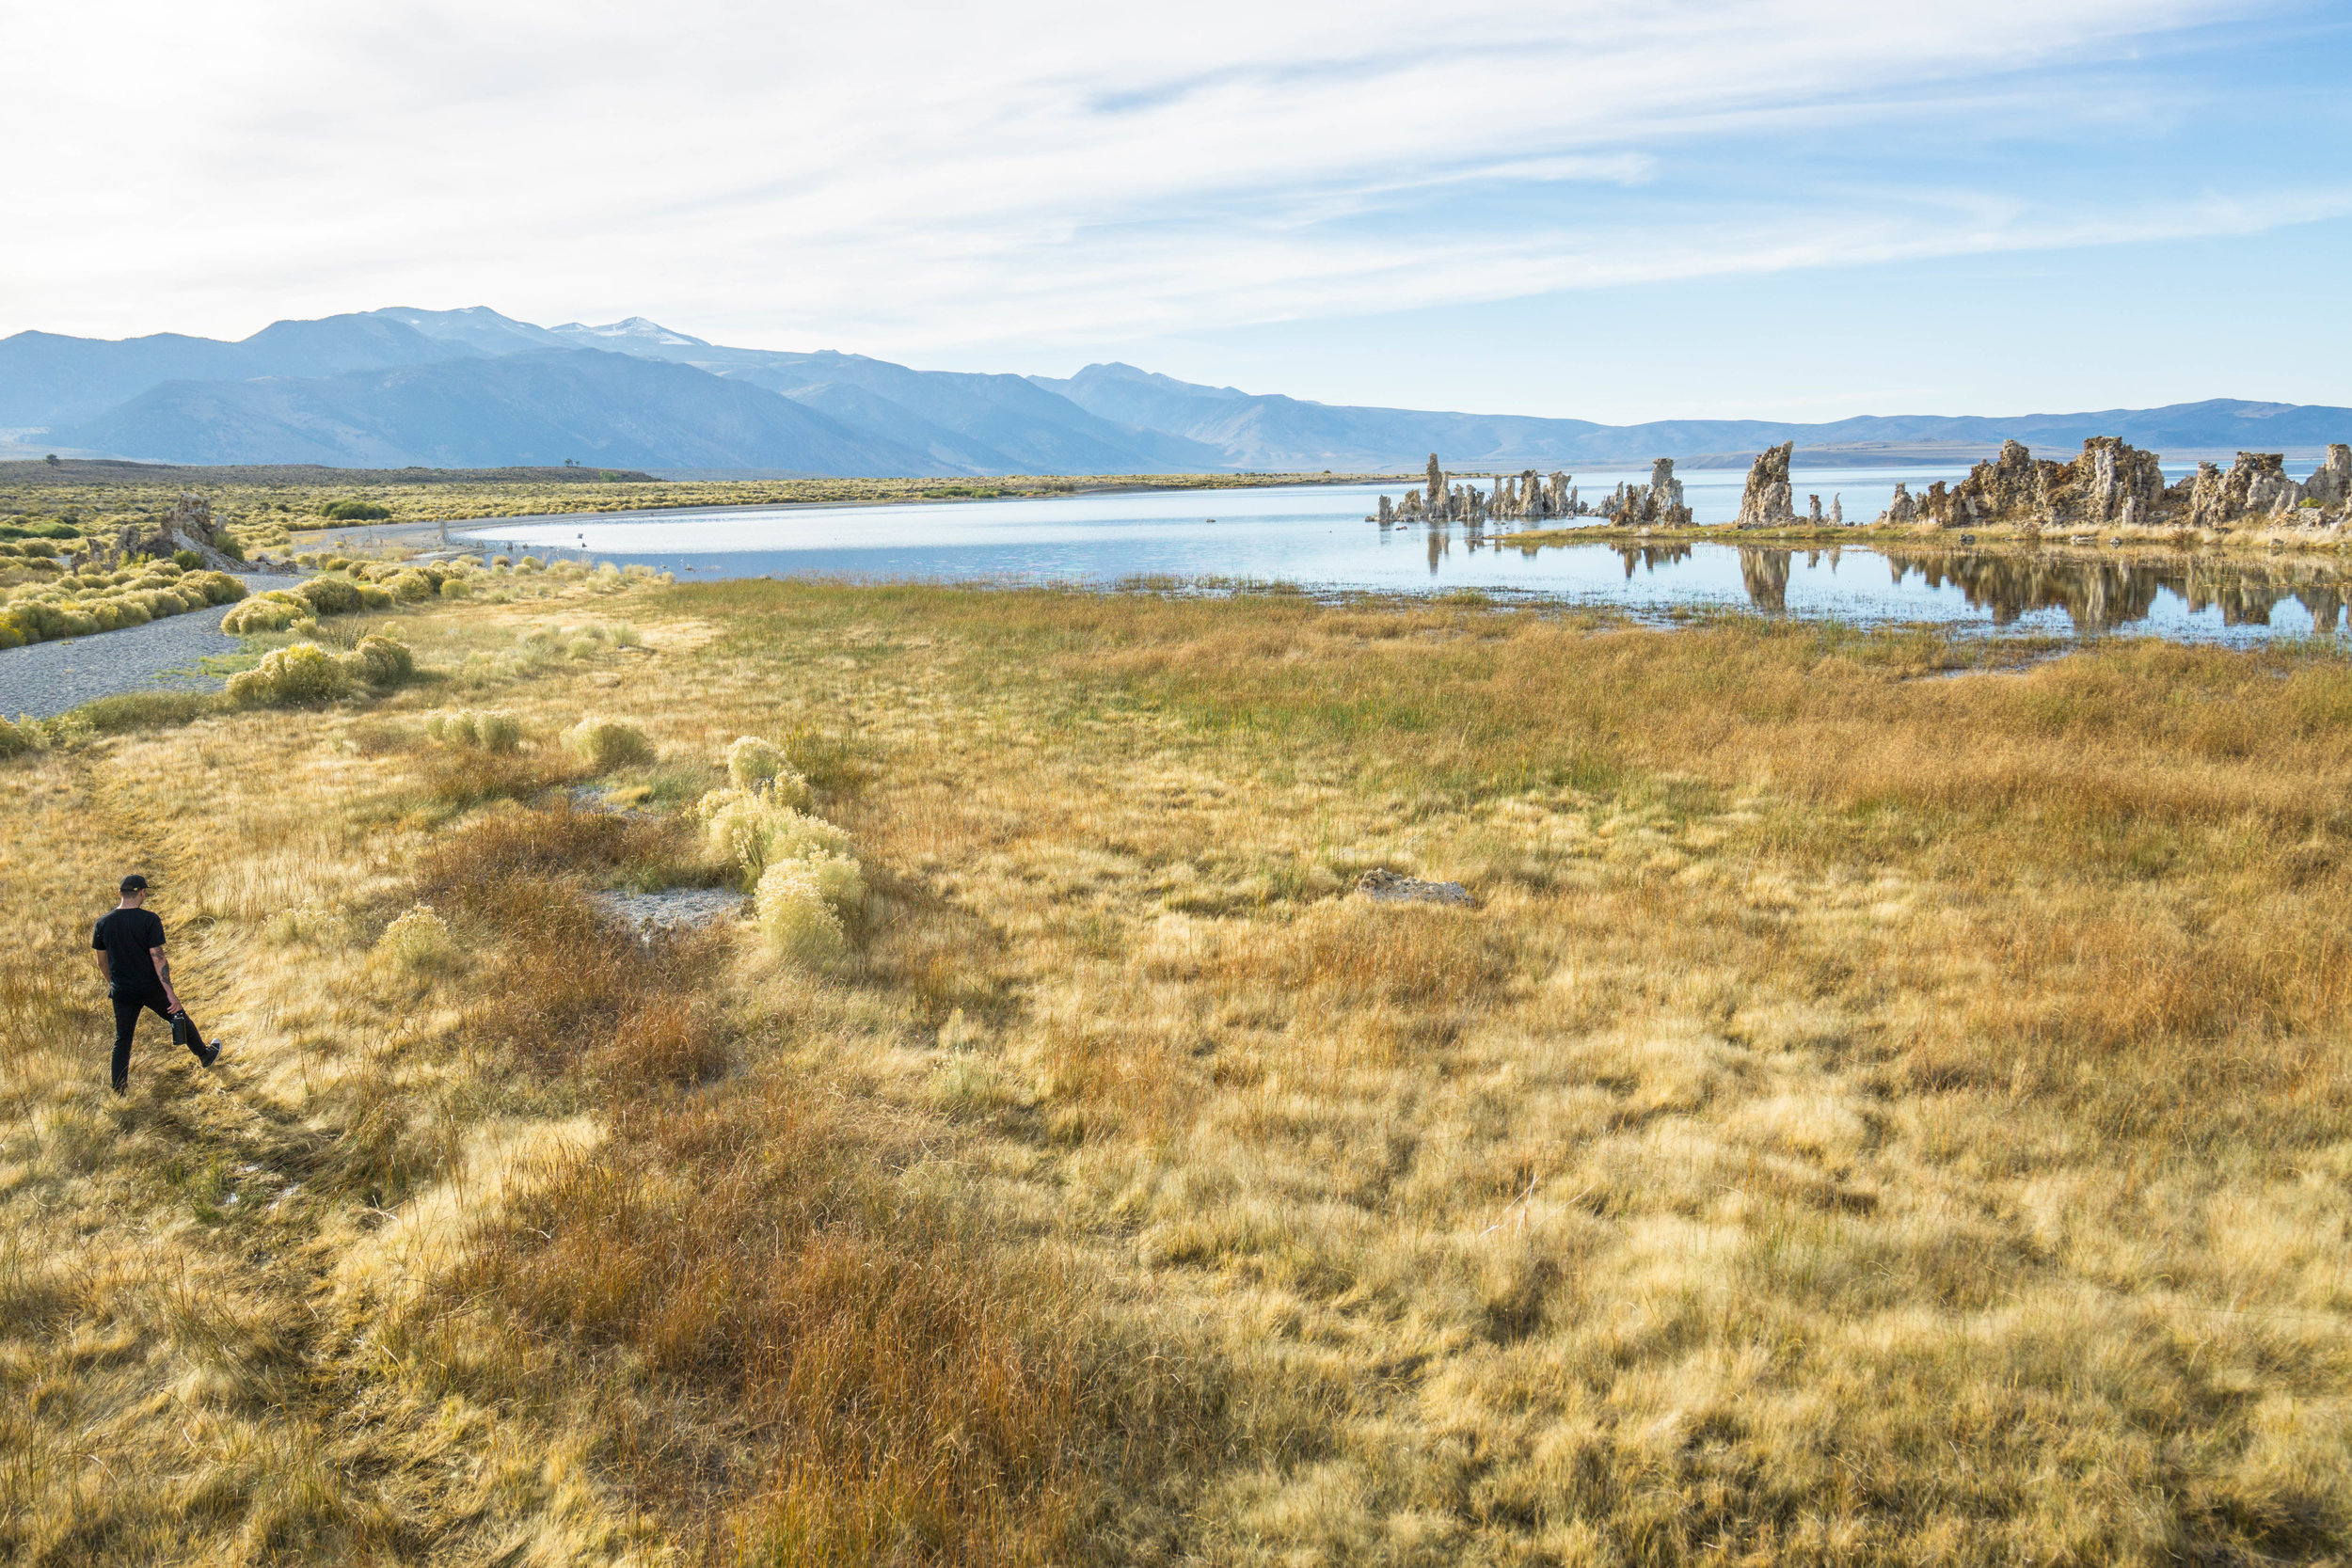 Leaving the leaves behind, we wander towards the spacey Mono Lake with its alien-looking tufa towers.